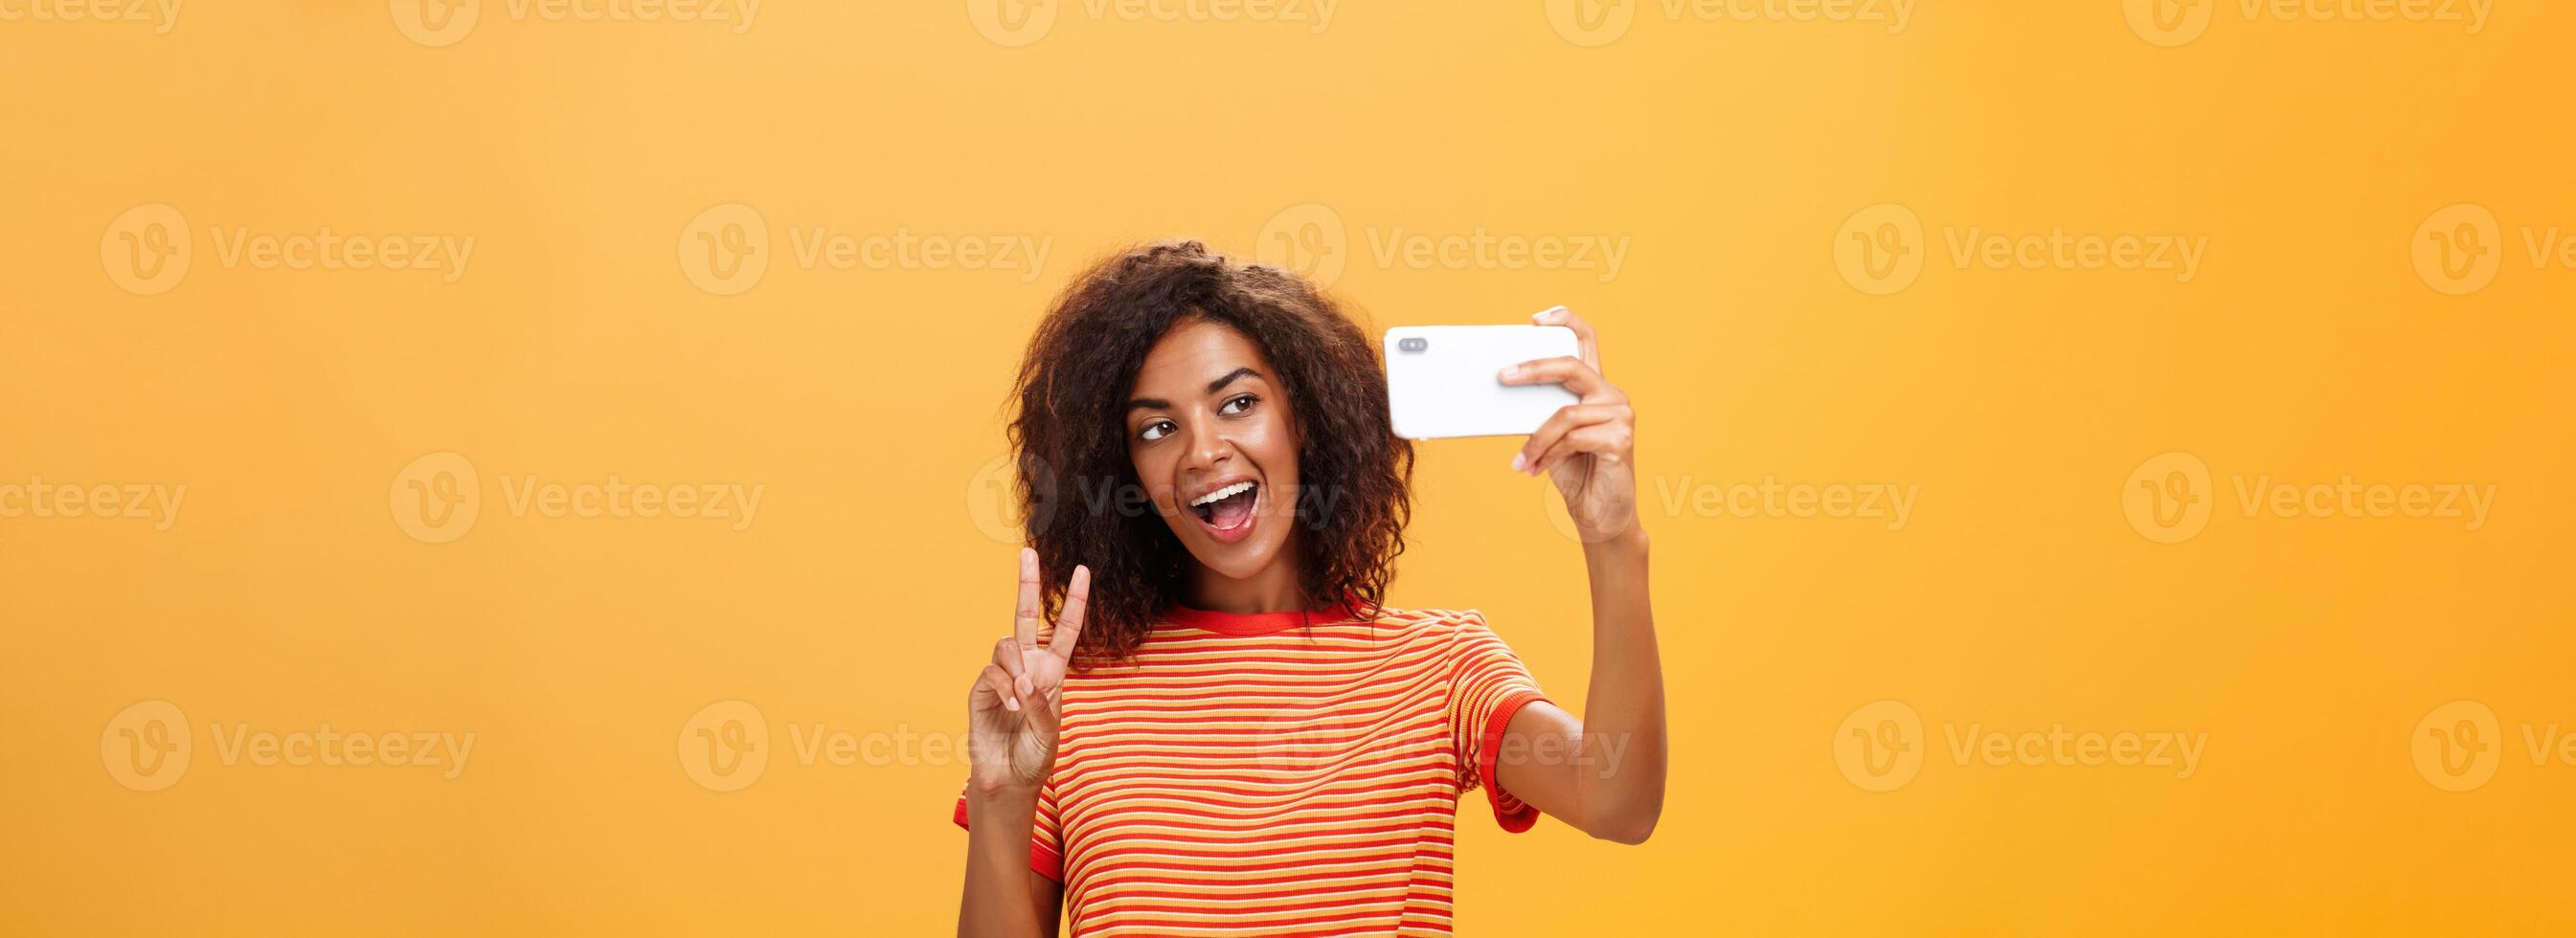 Smile to camera. Attractive and stylish self-assured dark-skinned female model with curly hairstyle showing peace gesture while taking selfie holding smartphone near face and smiling at gadget screen photo